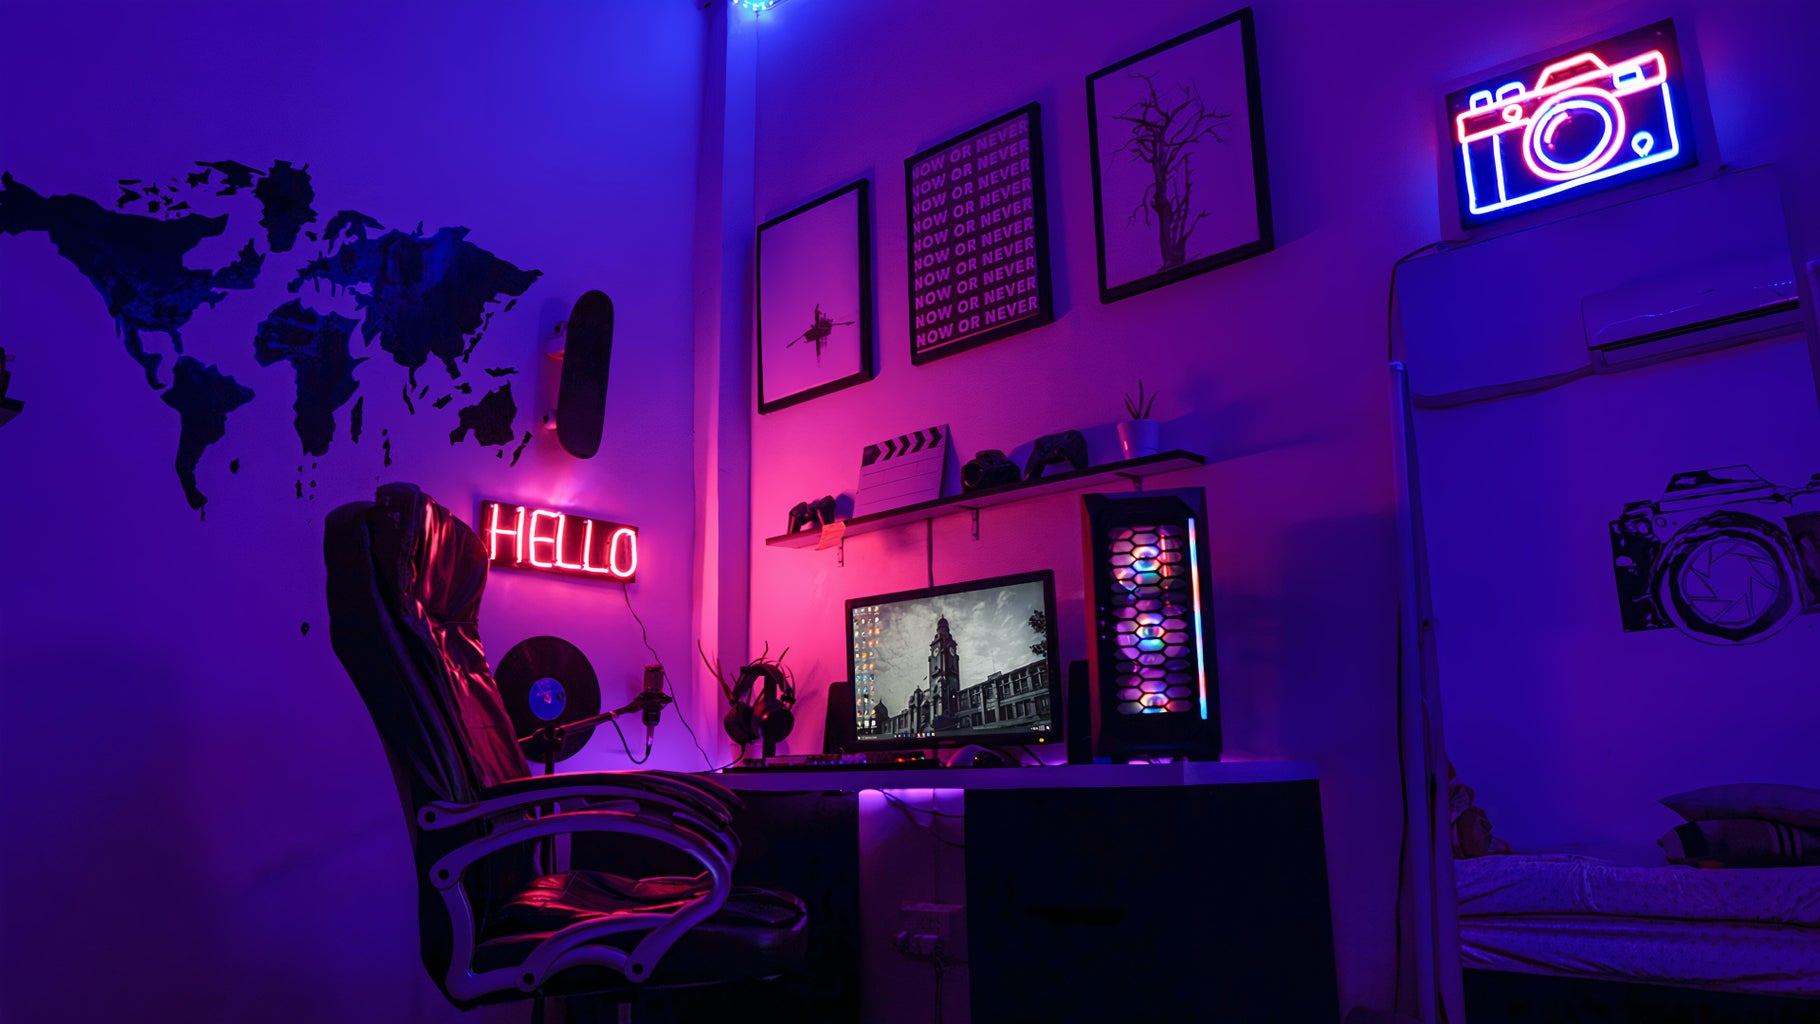 Relaxing office setup to record some beats in purple-pink lighting